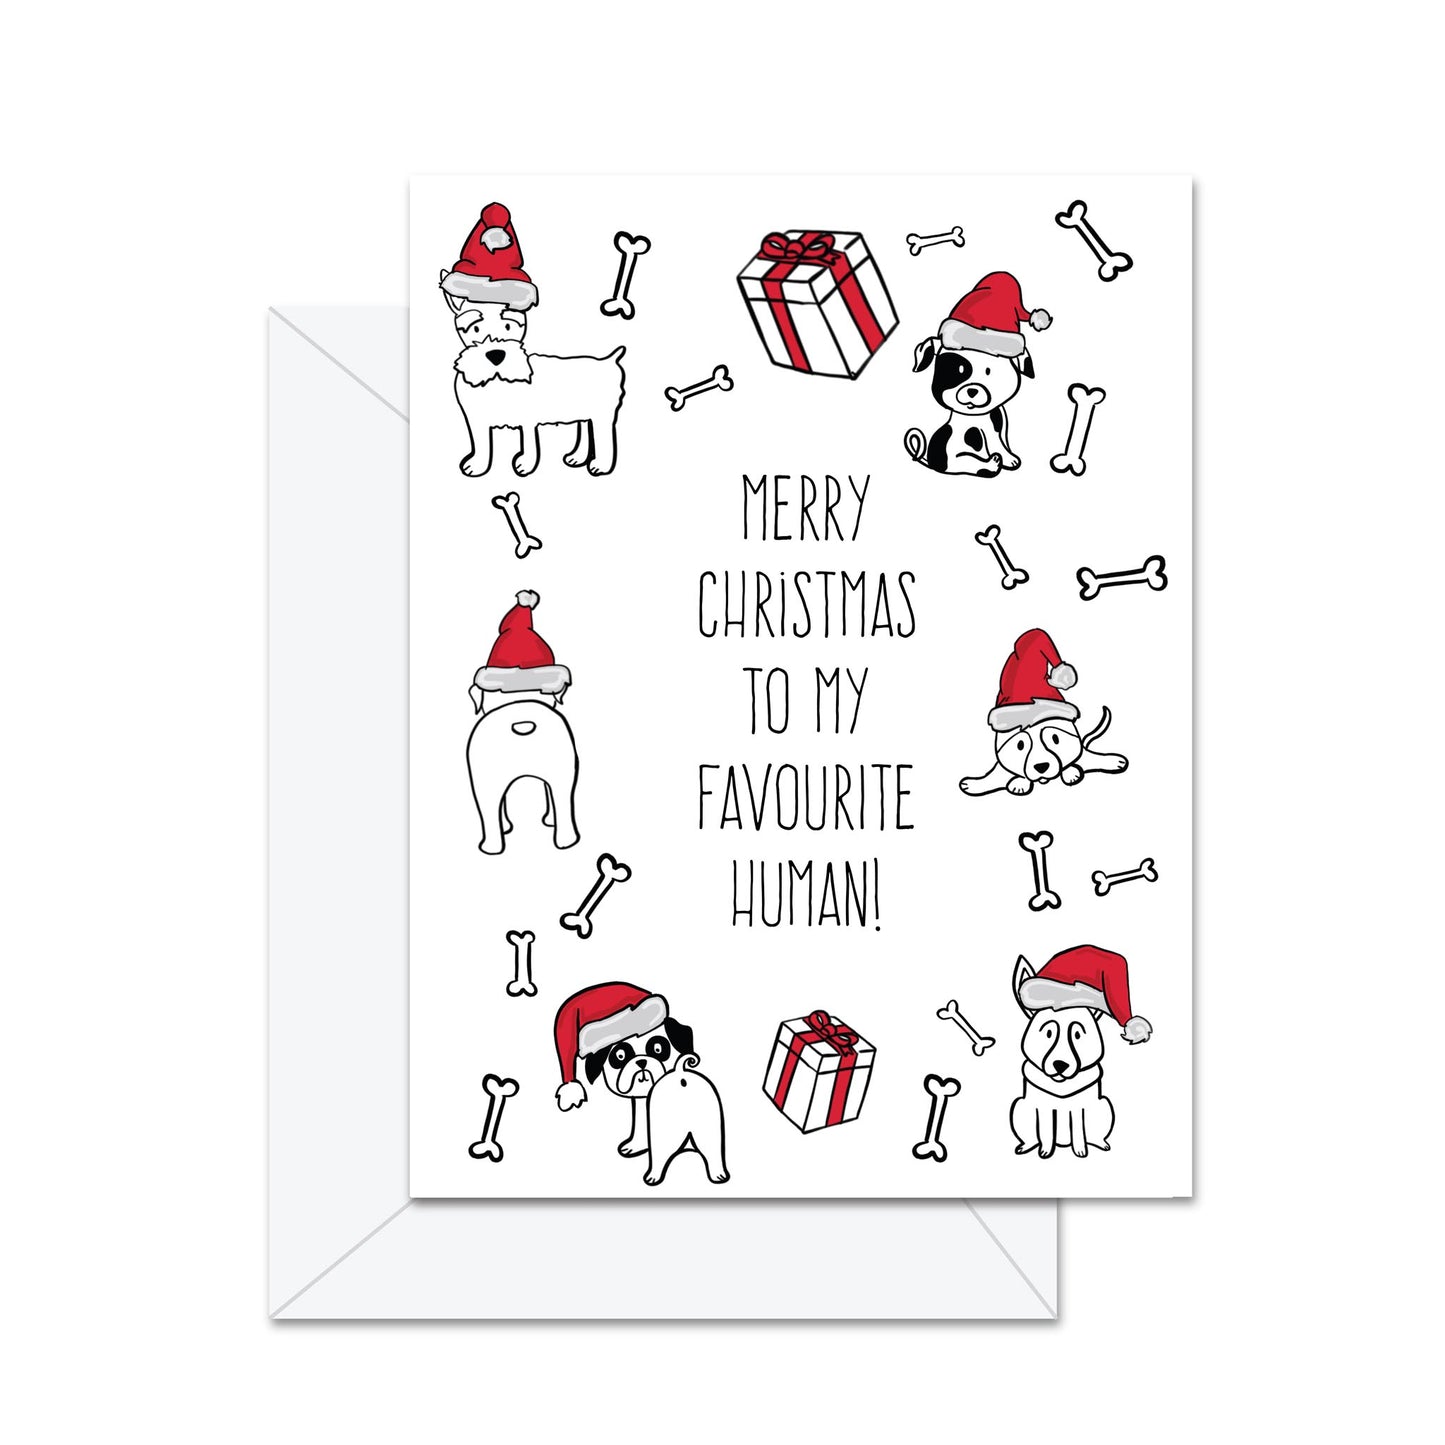 Merry Christmas To My Favourite Human! (Dog) - Greeting Card